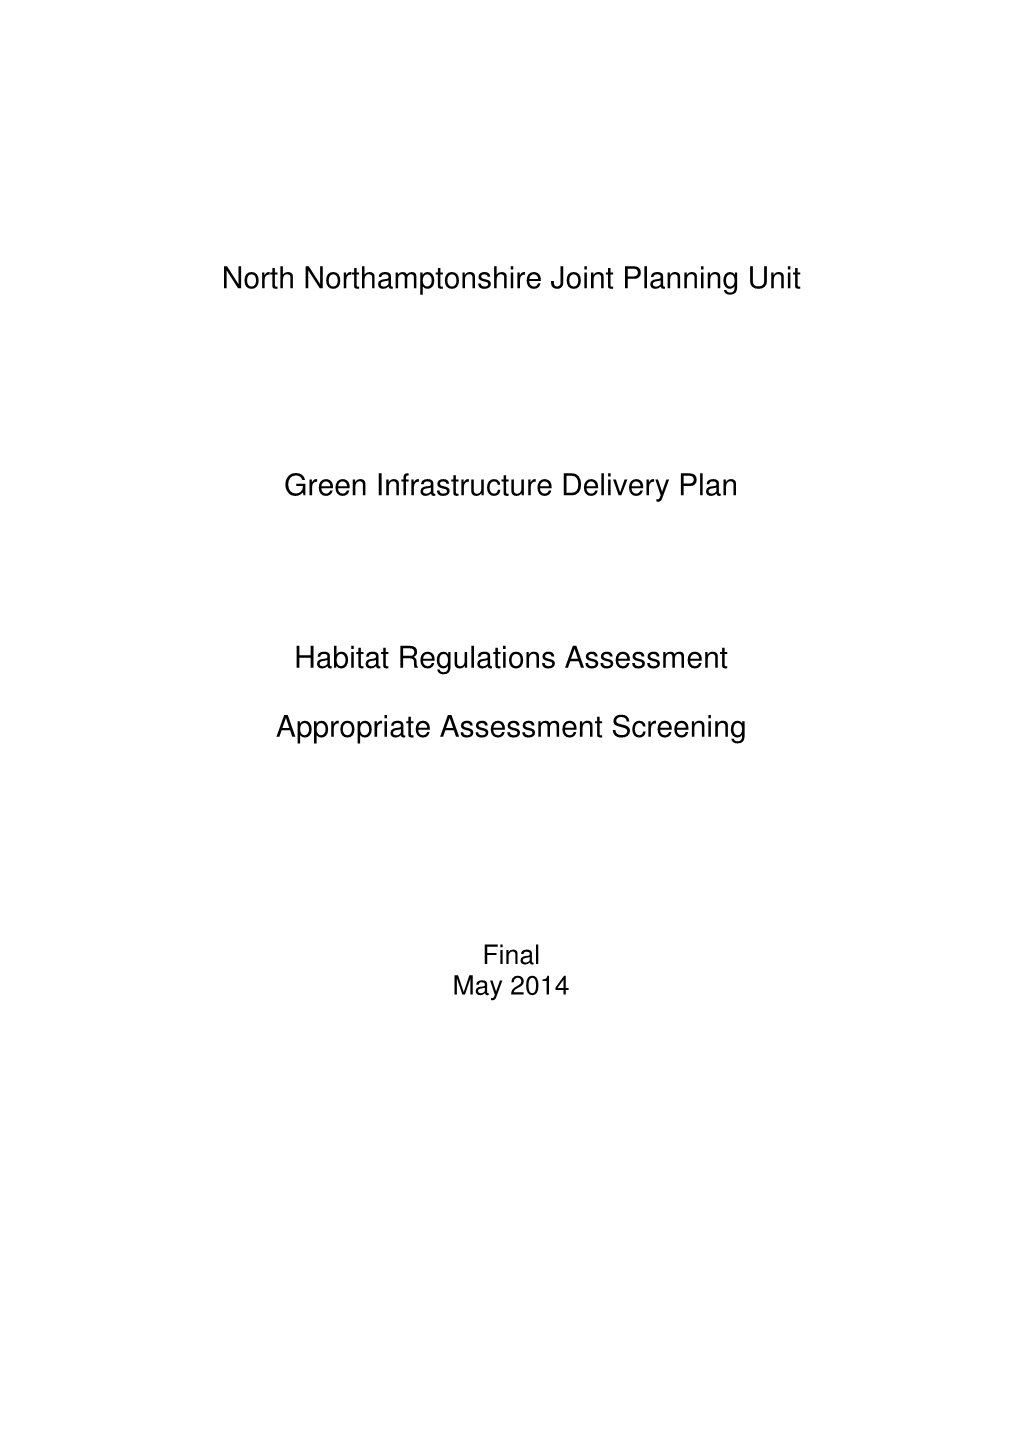 North Northamptonshire Joint Planning Unit Green Infrastructure